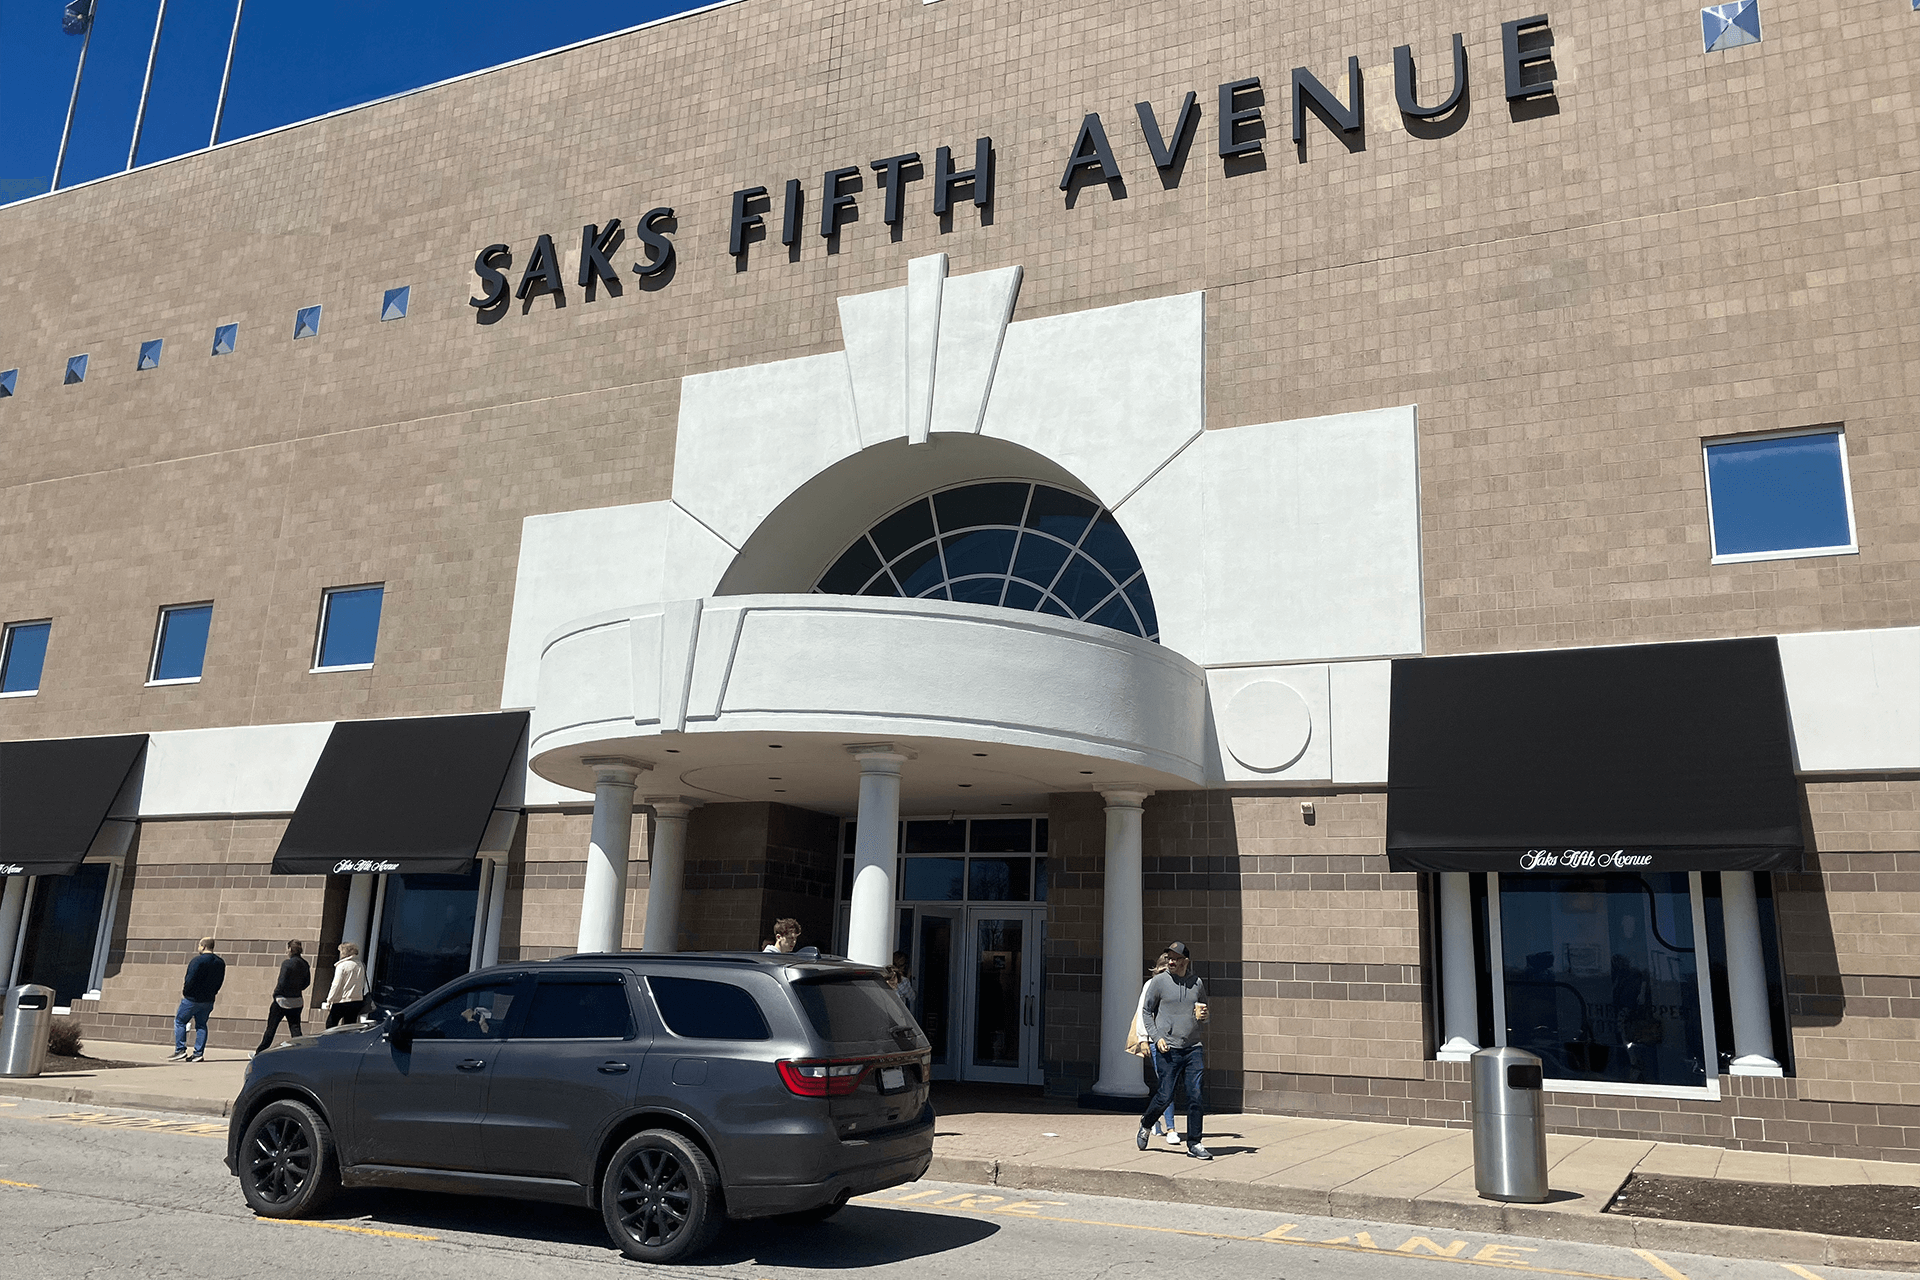 LOCAL: The Fashion Mall at Keystone To Redevelop, Close Saks Fifth Avenue